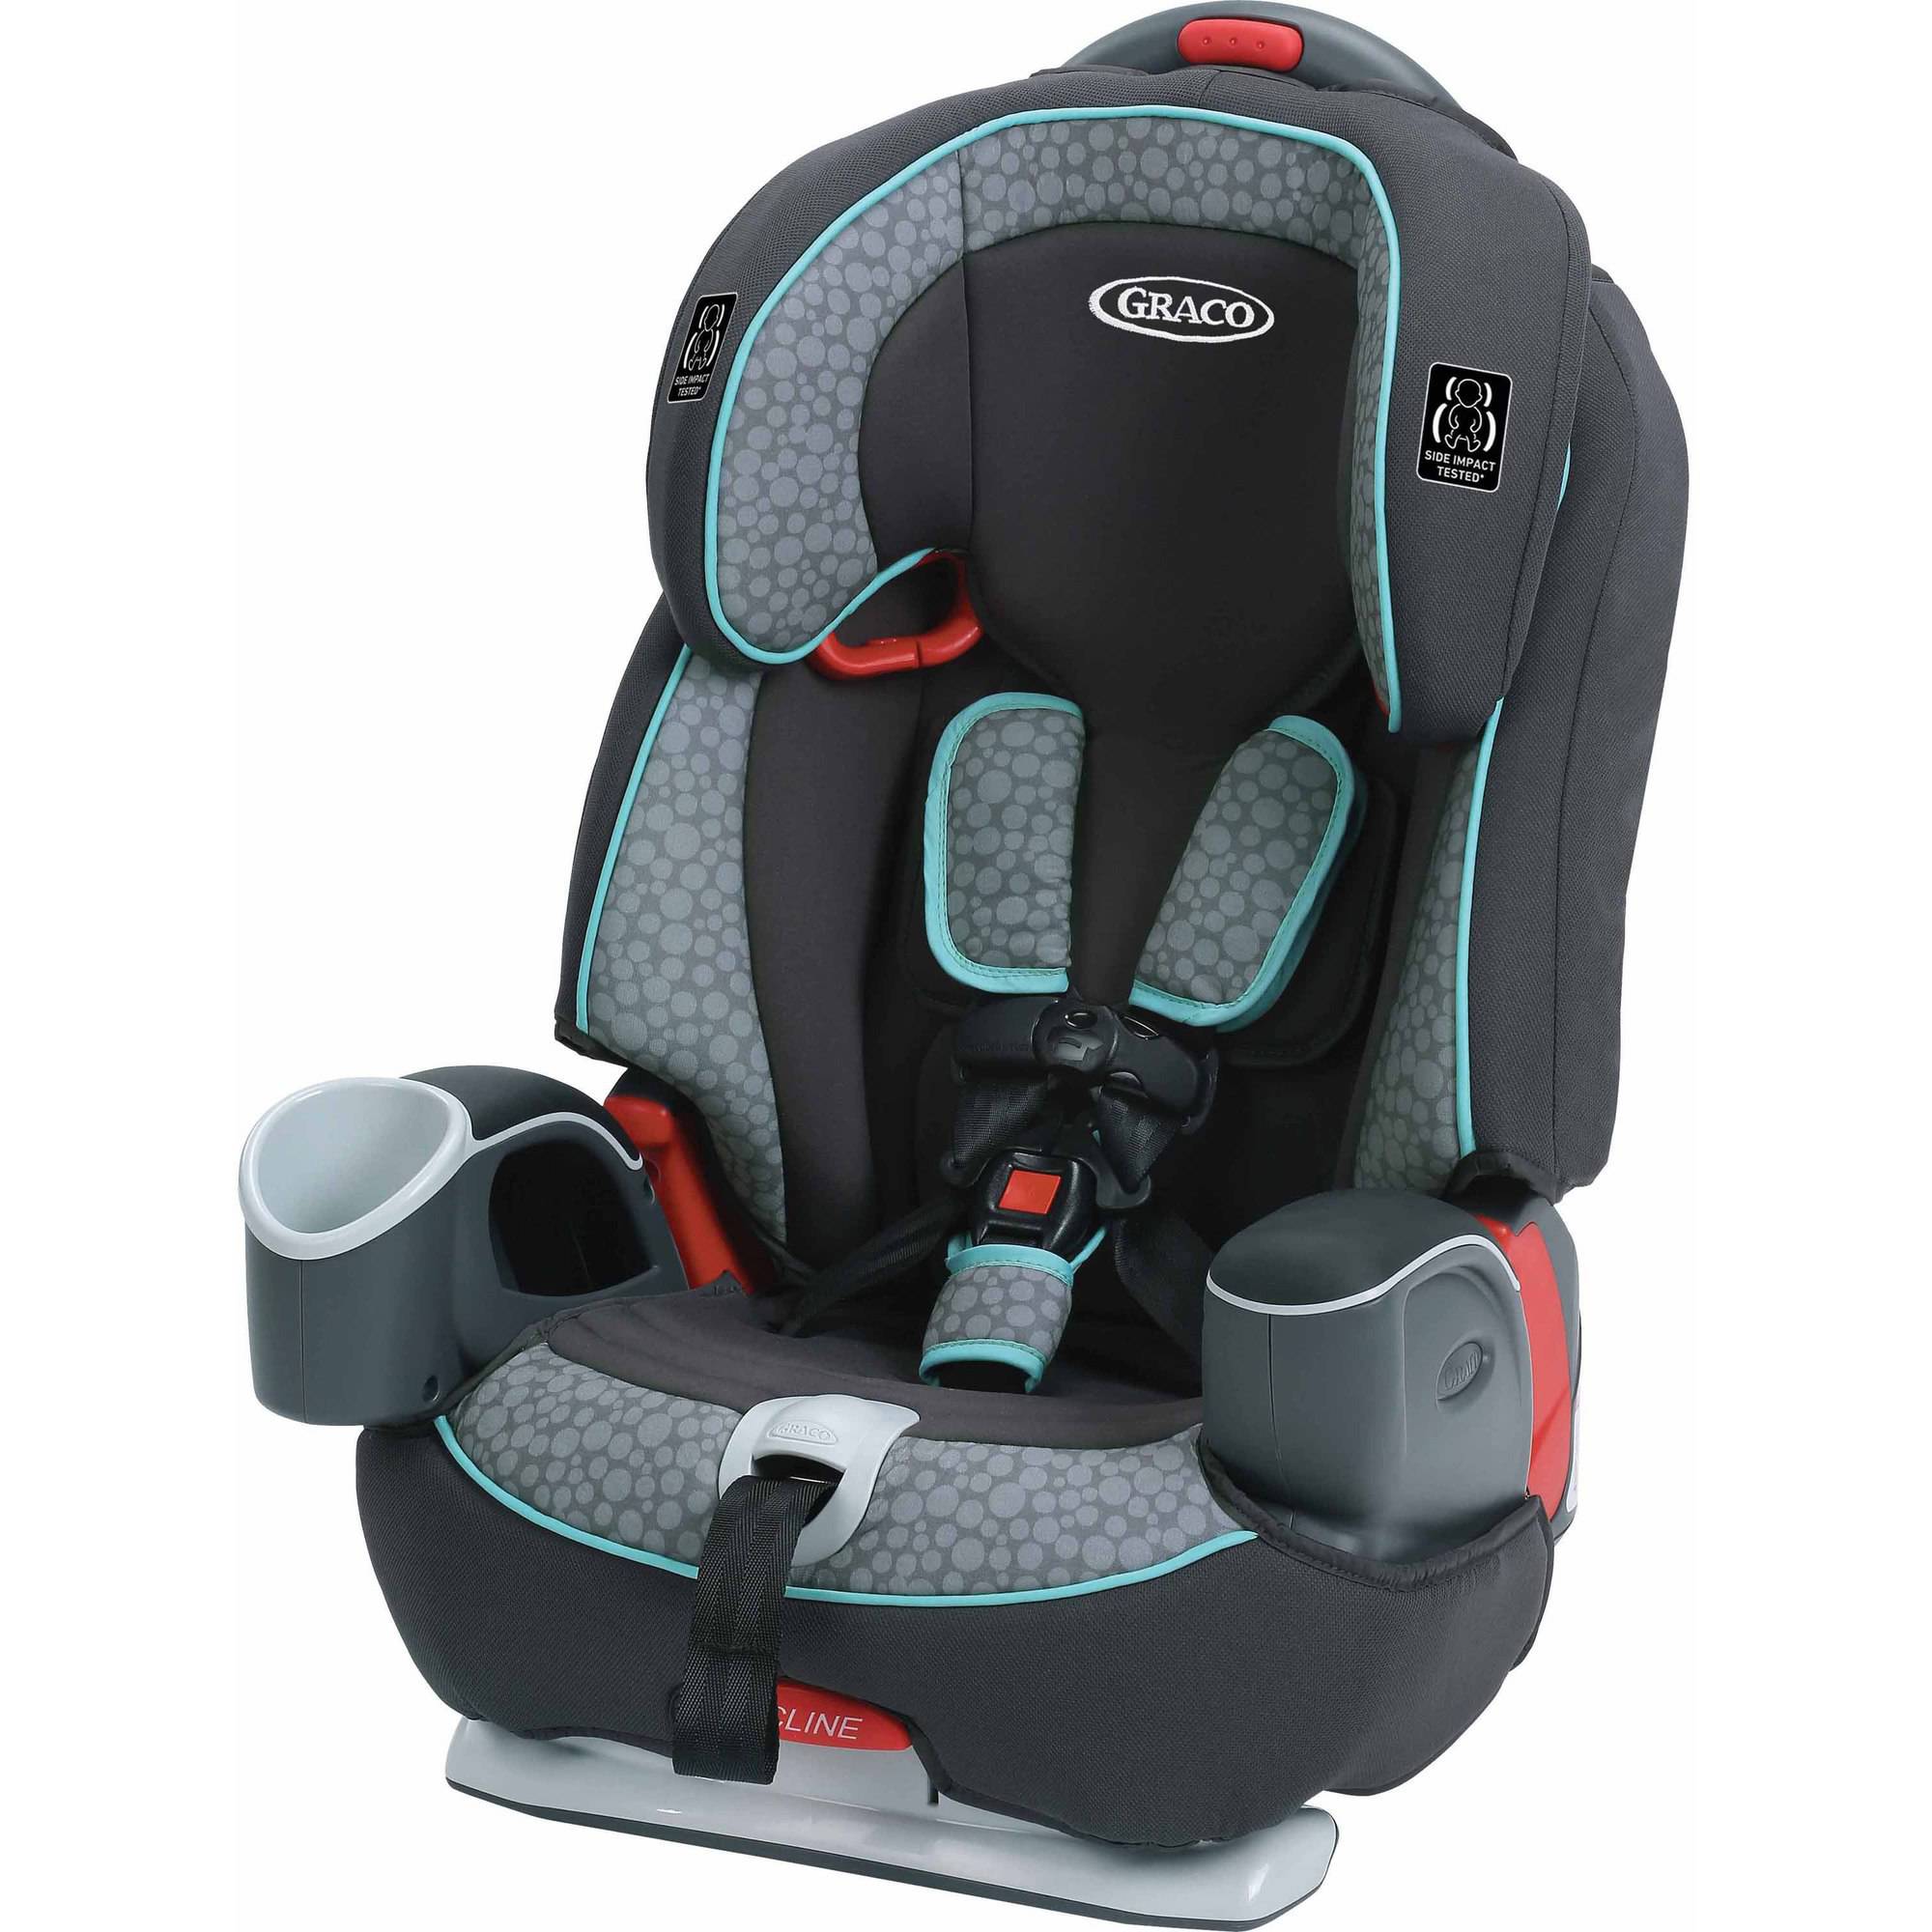 Graco® Nautilus® 65 3-in-1 Harness Booster Car Seat, Sully Teal - image 4 of 10